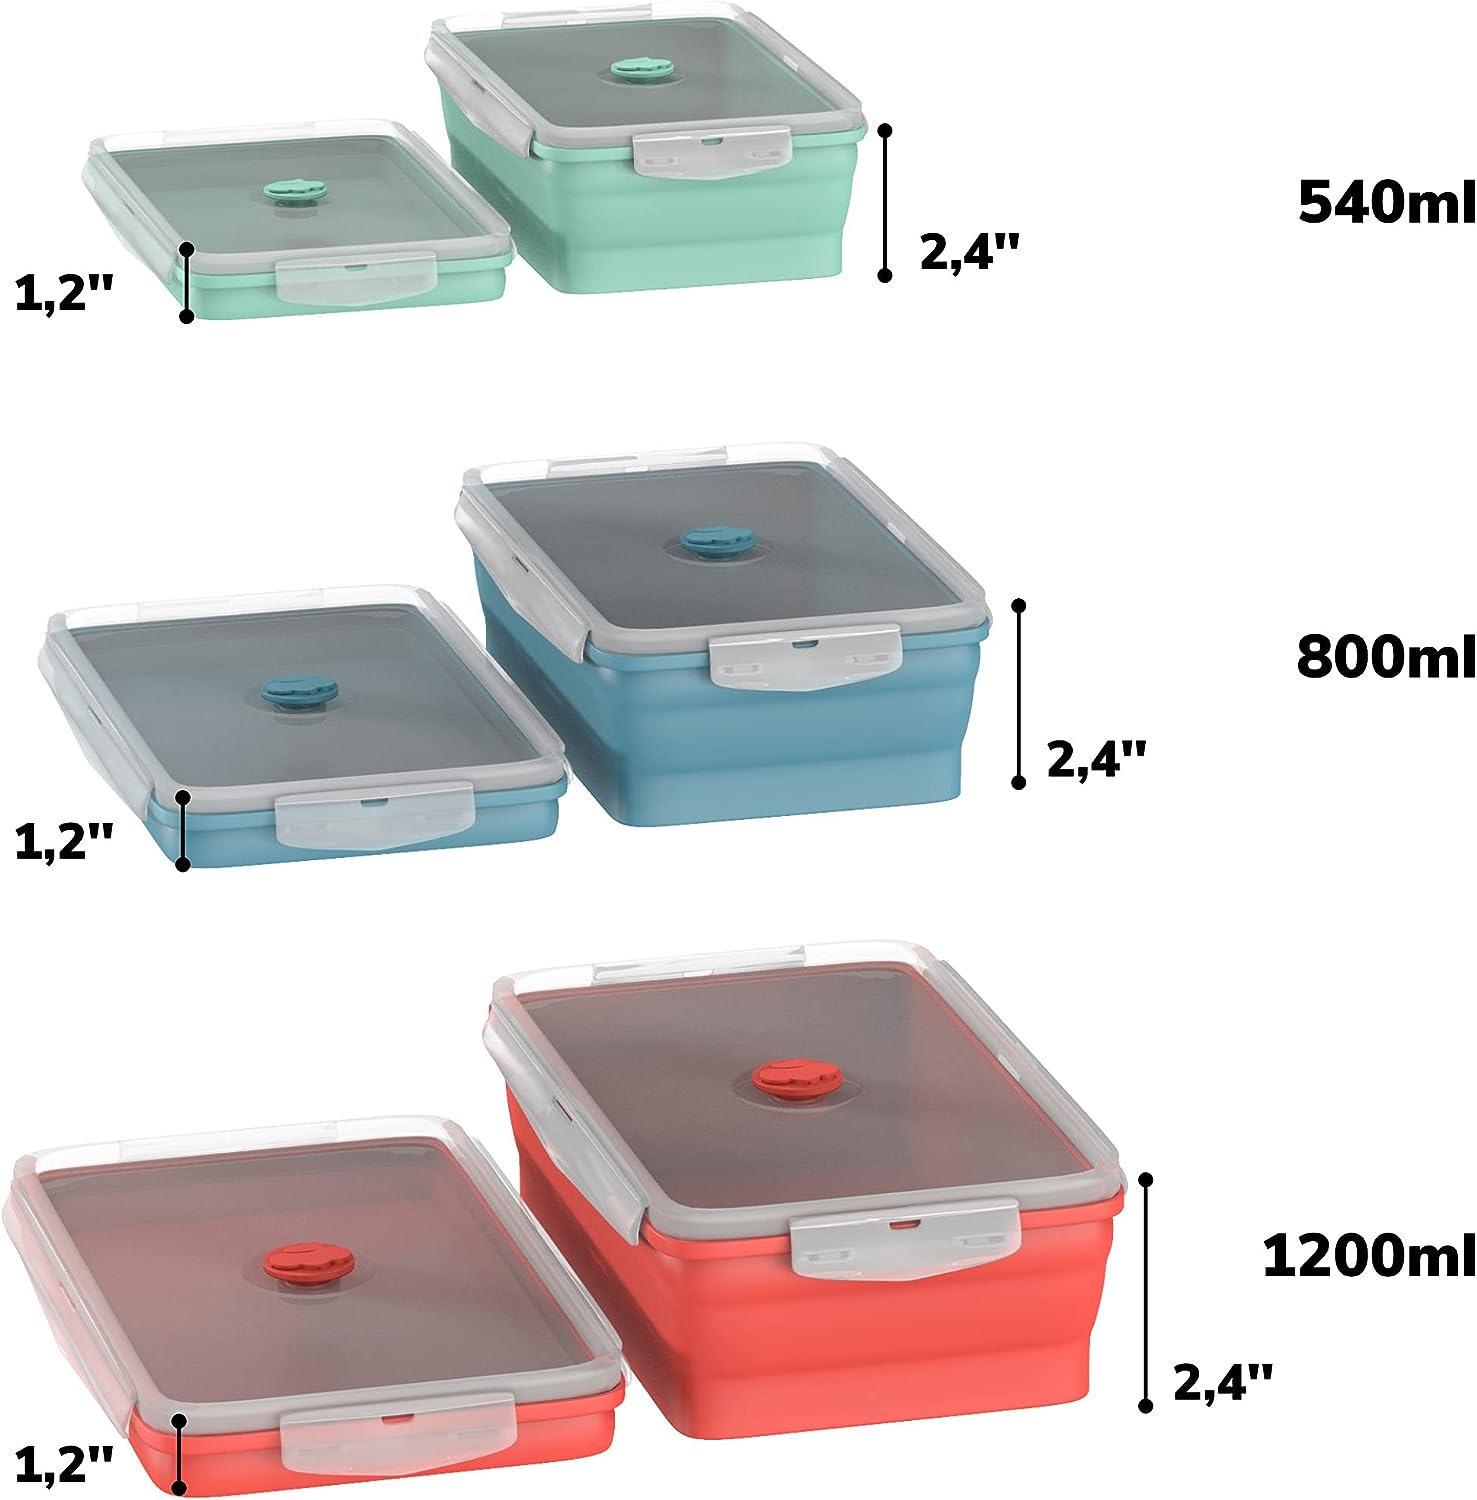  Cozihom Collapsible Silicone Food Storage Container